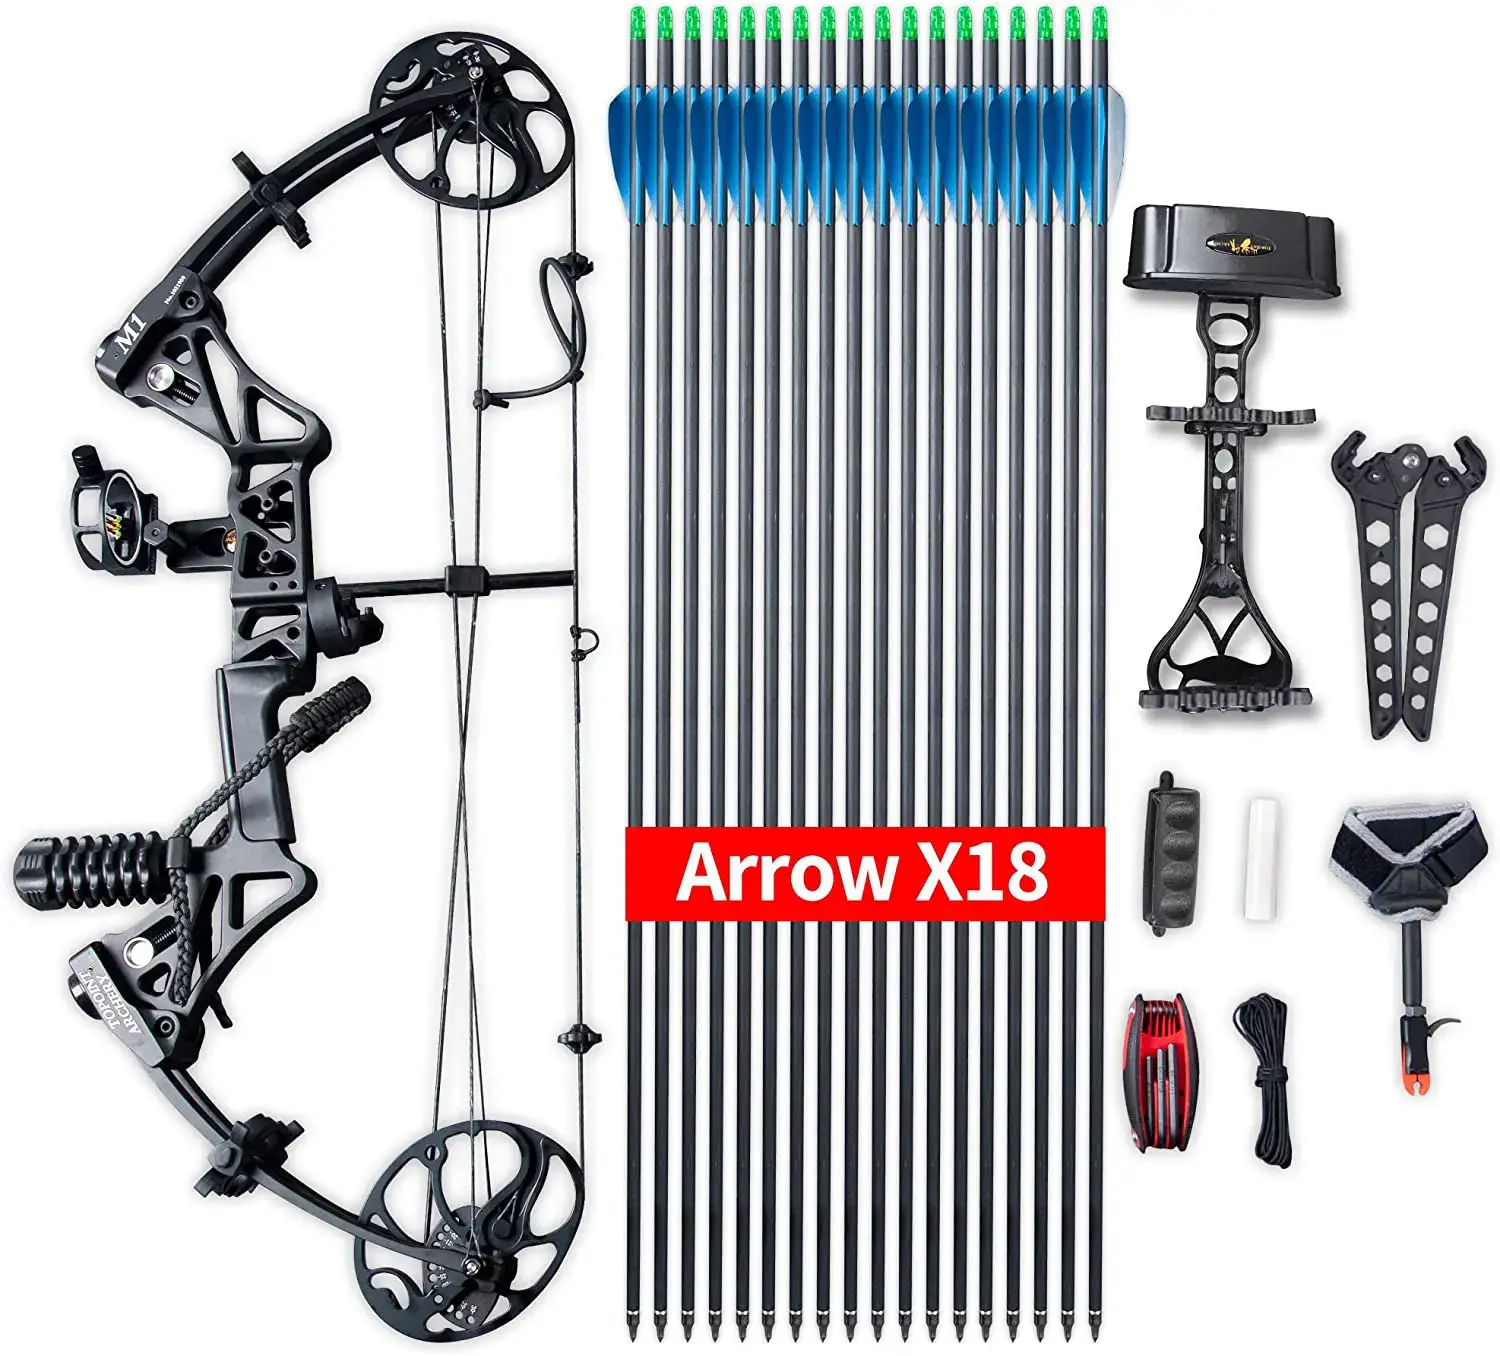 Compound Bow Topoint Archery Package M1